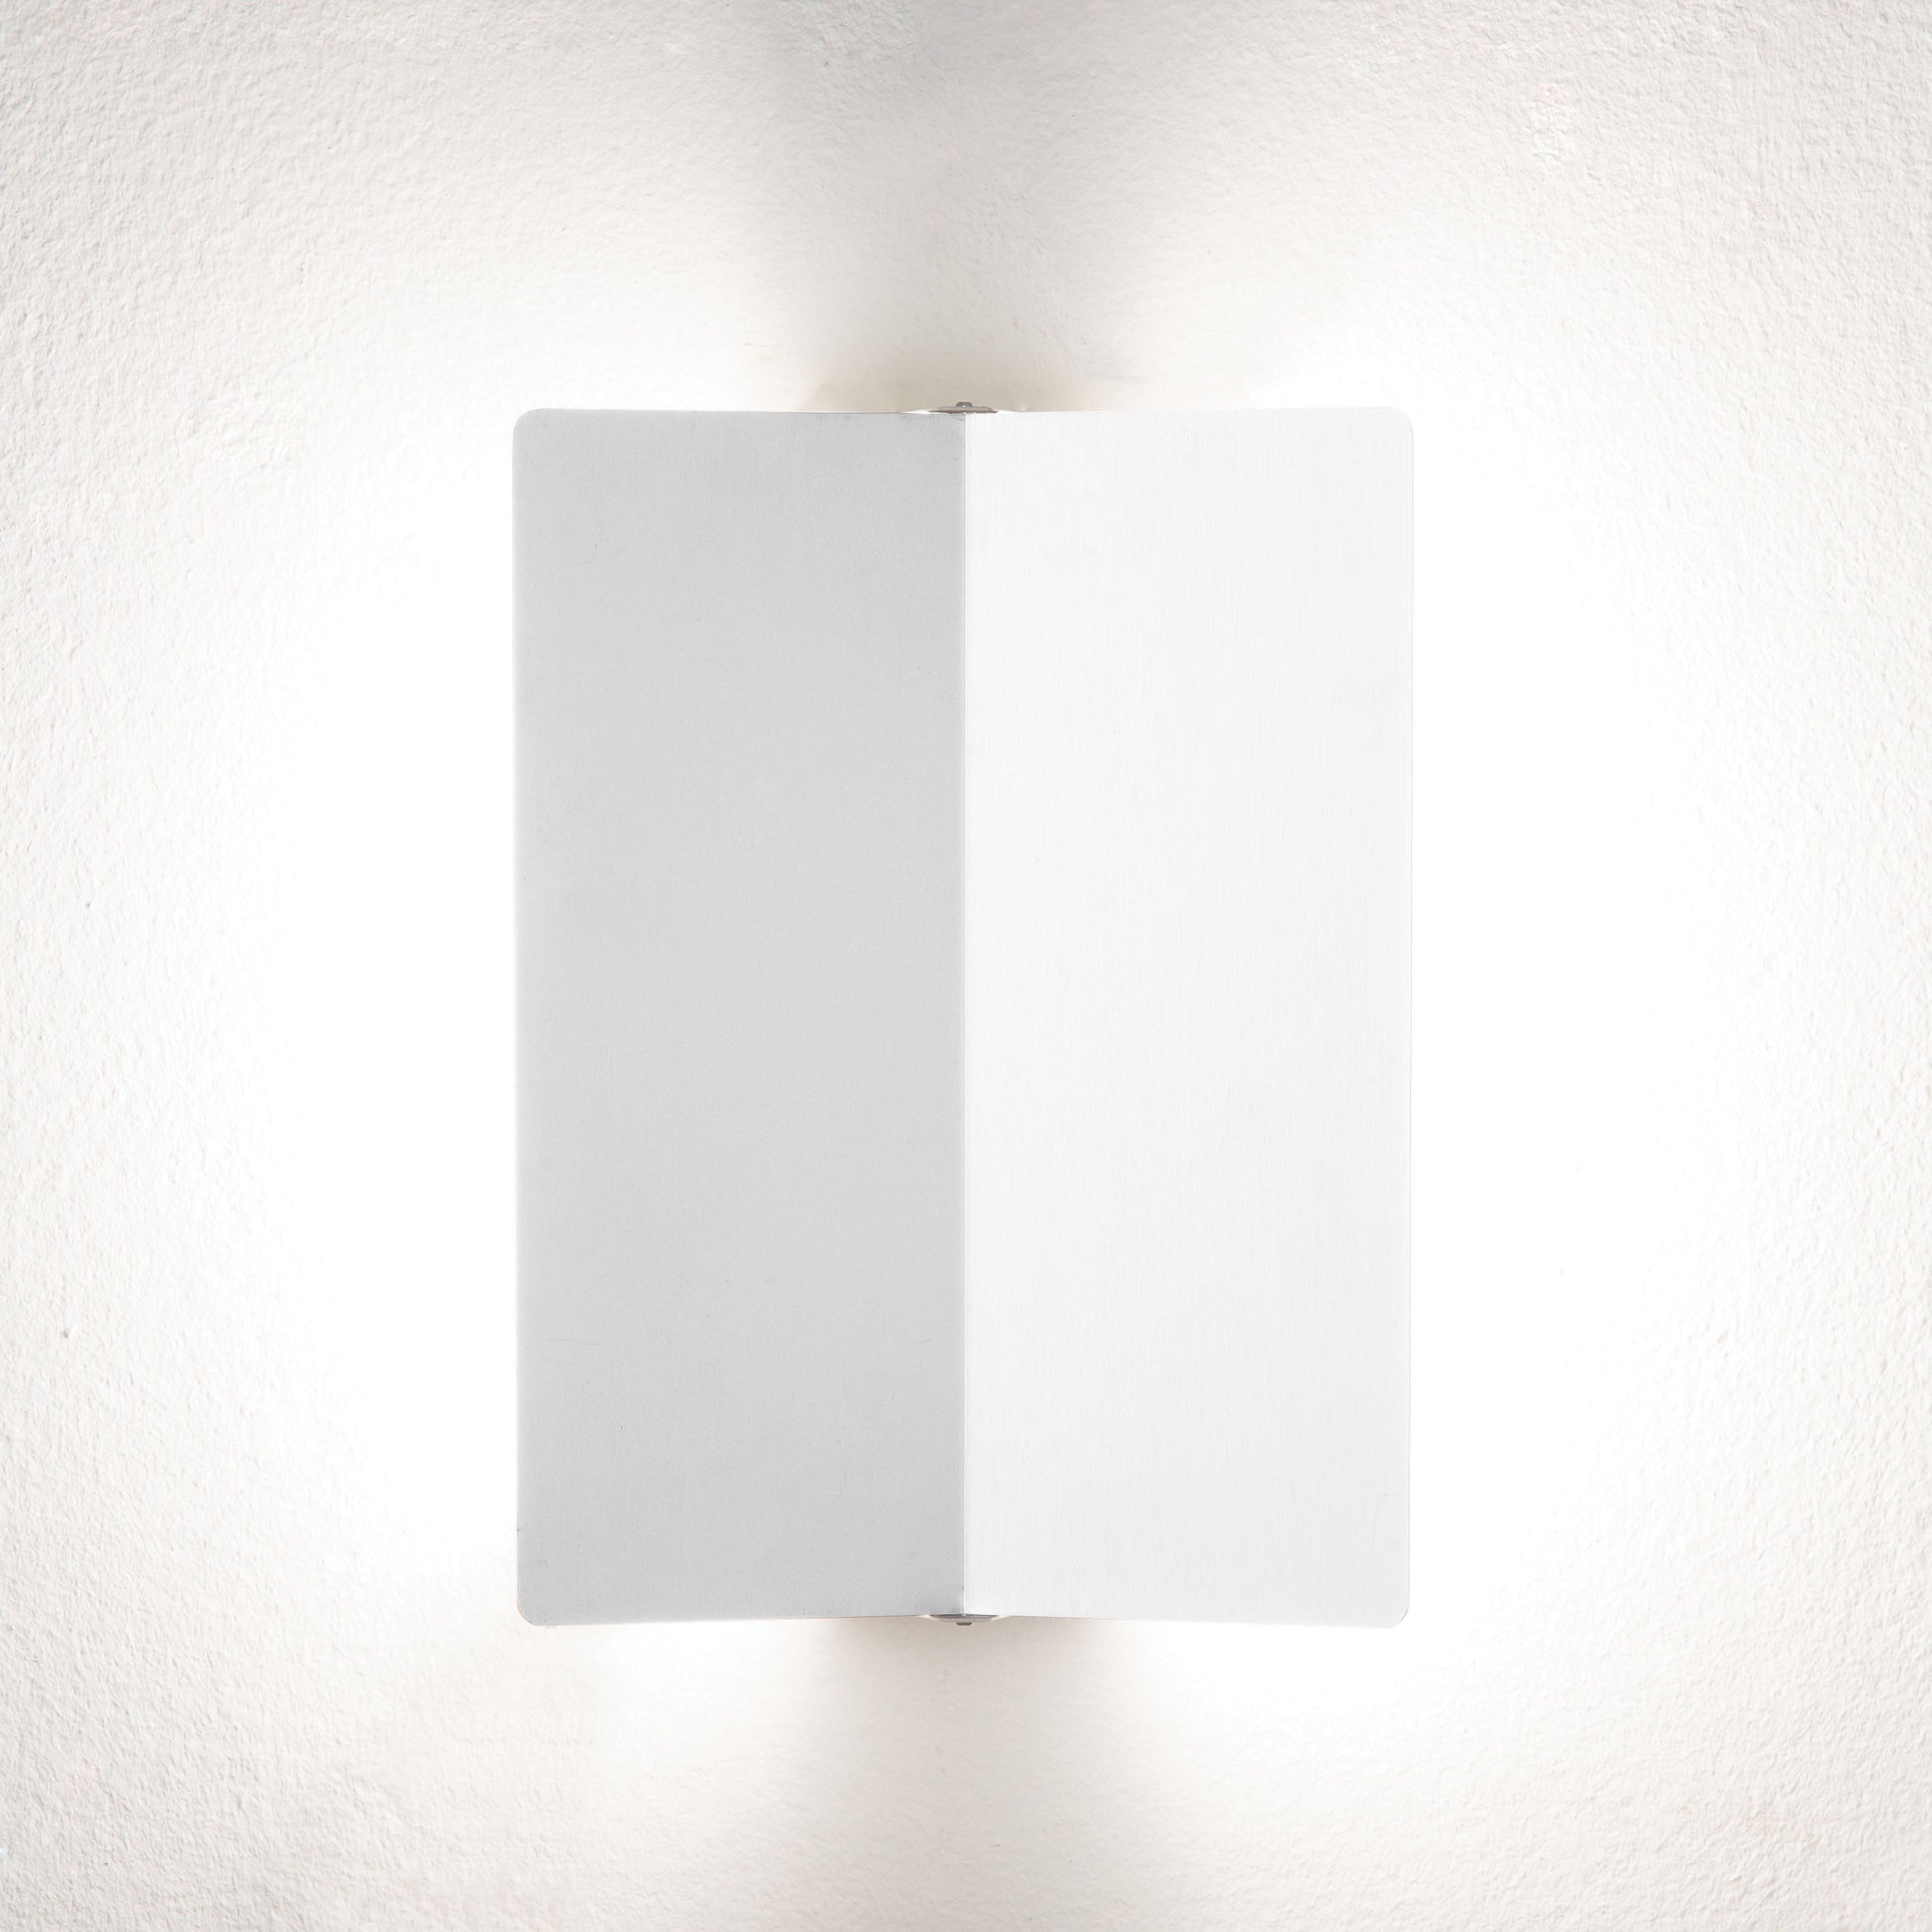 White adjustable  pivotable wall lamp by Nemo